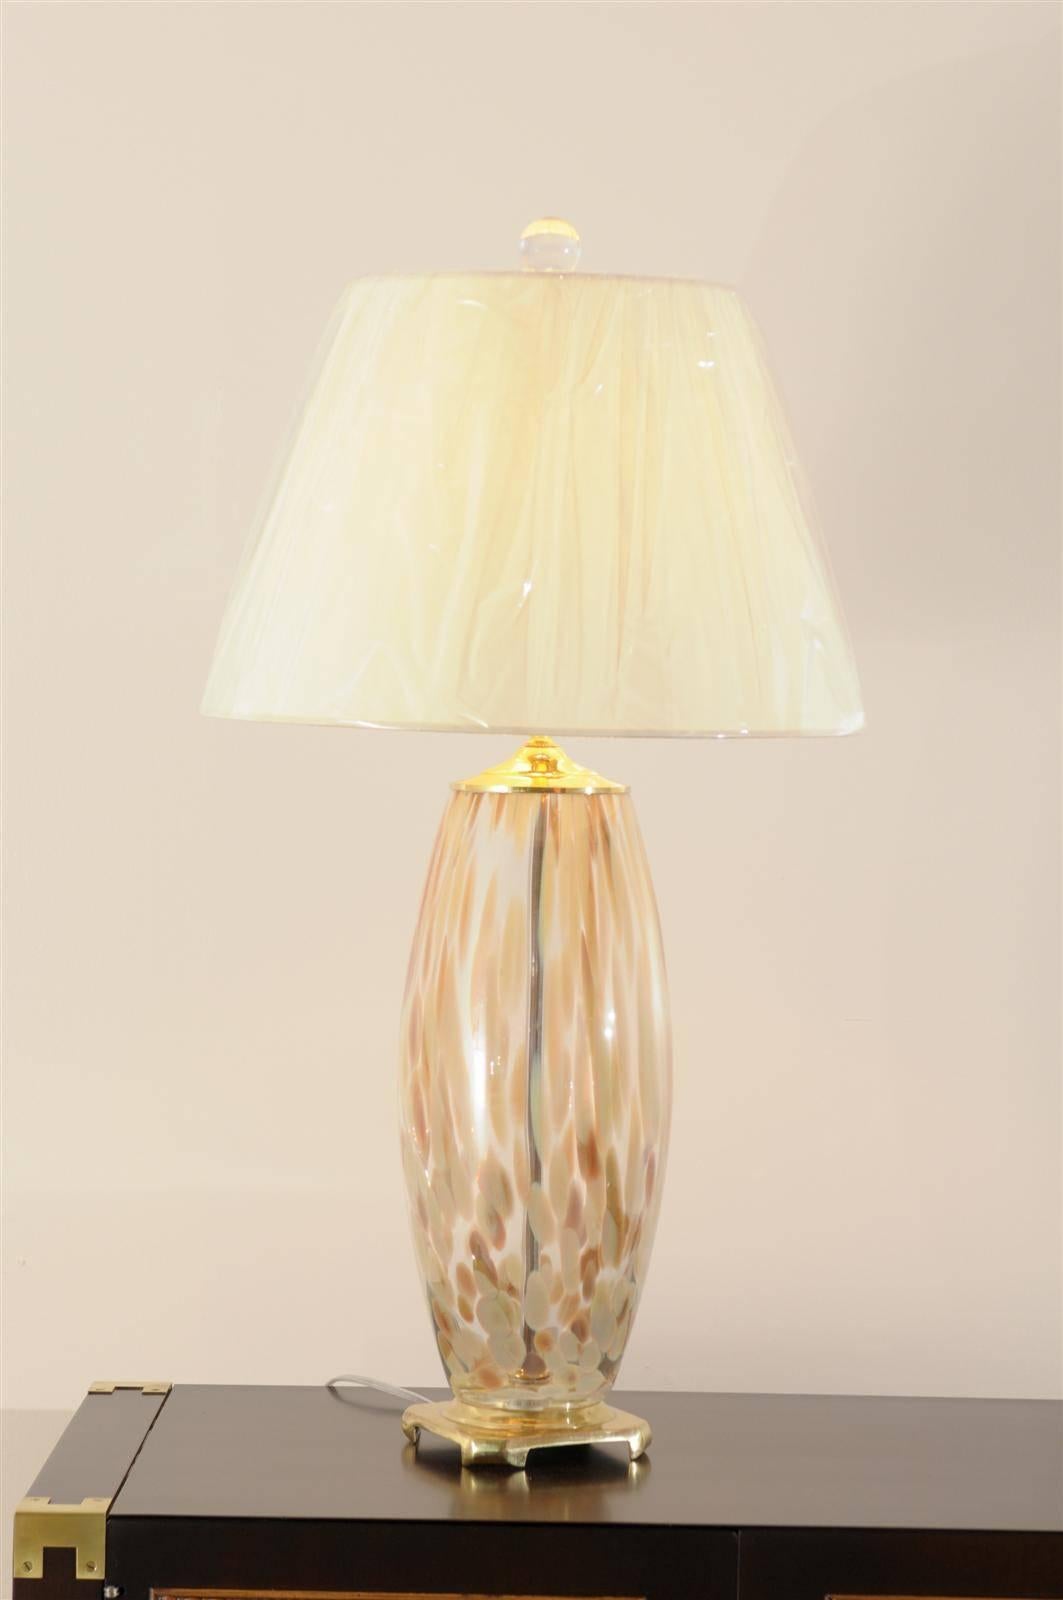 A stellar pair of blown Murano glass lamps, circa 1970s. Beautiful form and color. Exquisite Jewelry! Excellent restored condition. All brass components have been re-plated. Rewired using clear cord, complete with new Spanish parchment shades and